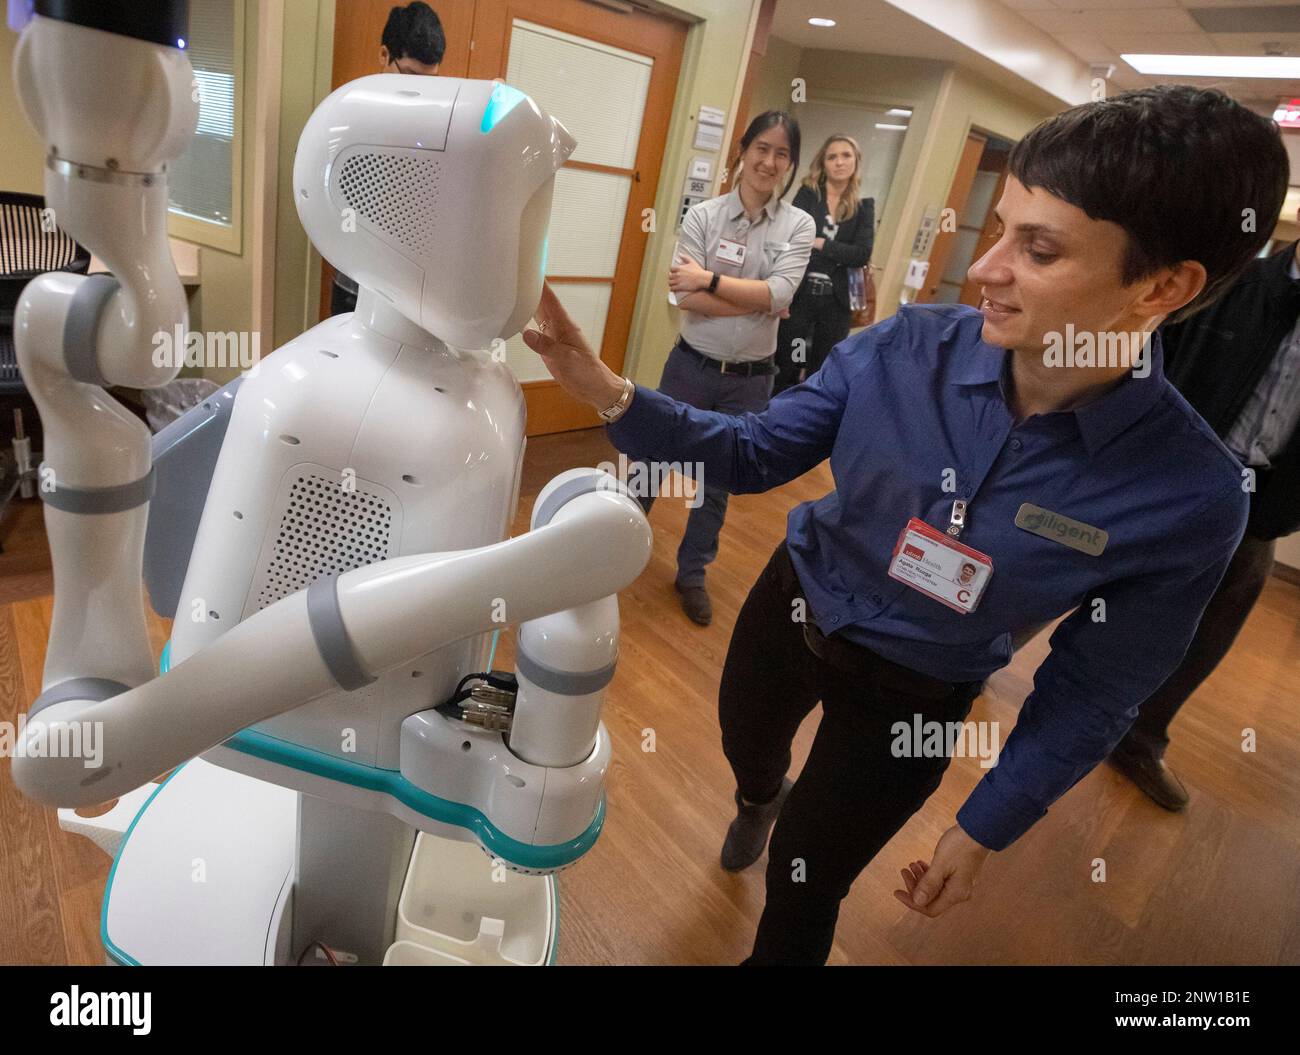 In this on Monday, Jan. 21, 2019 photo, Agata Rozga, of Diligent Robotics,  points out features on the company's medical assistant robot, Moxi, in a  hallway at the University of Texas Medical